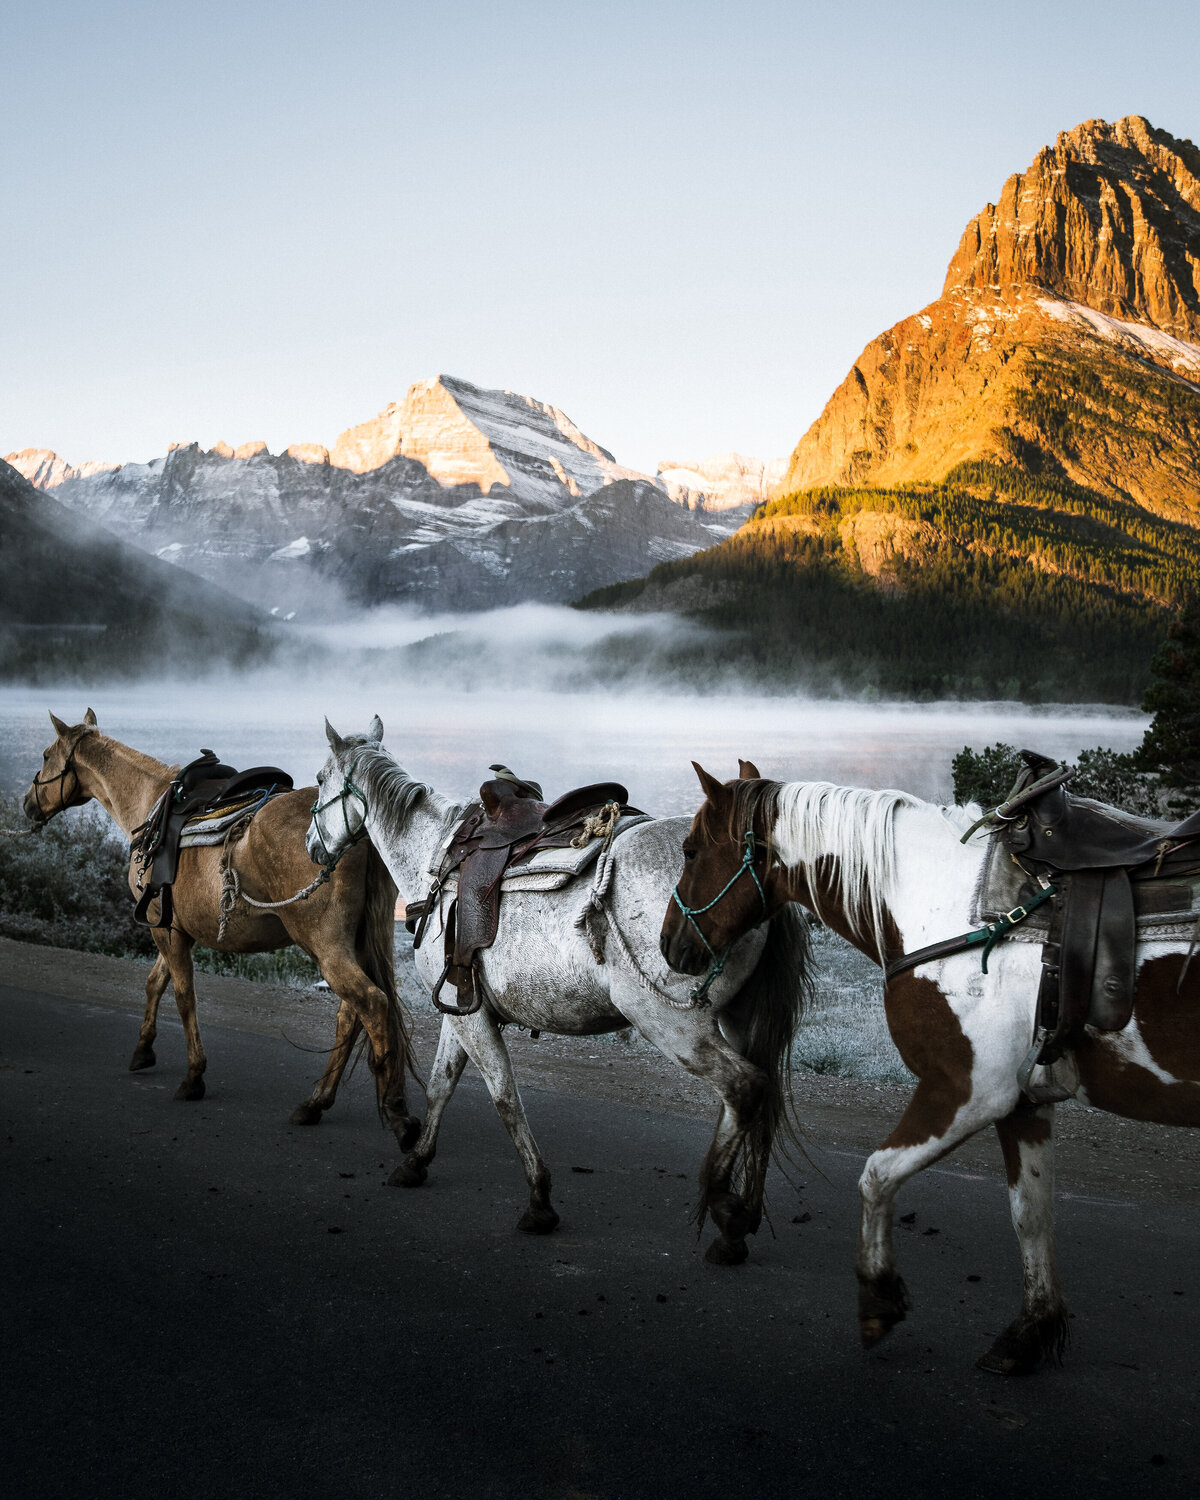 Three horses with saddles walking on path in front of mountains with fog